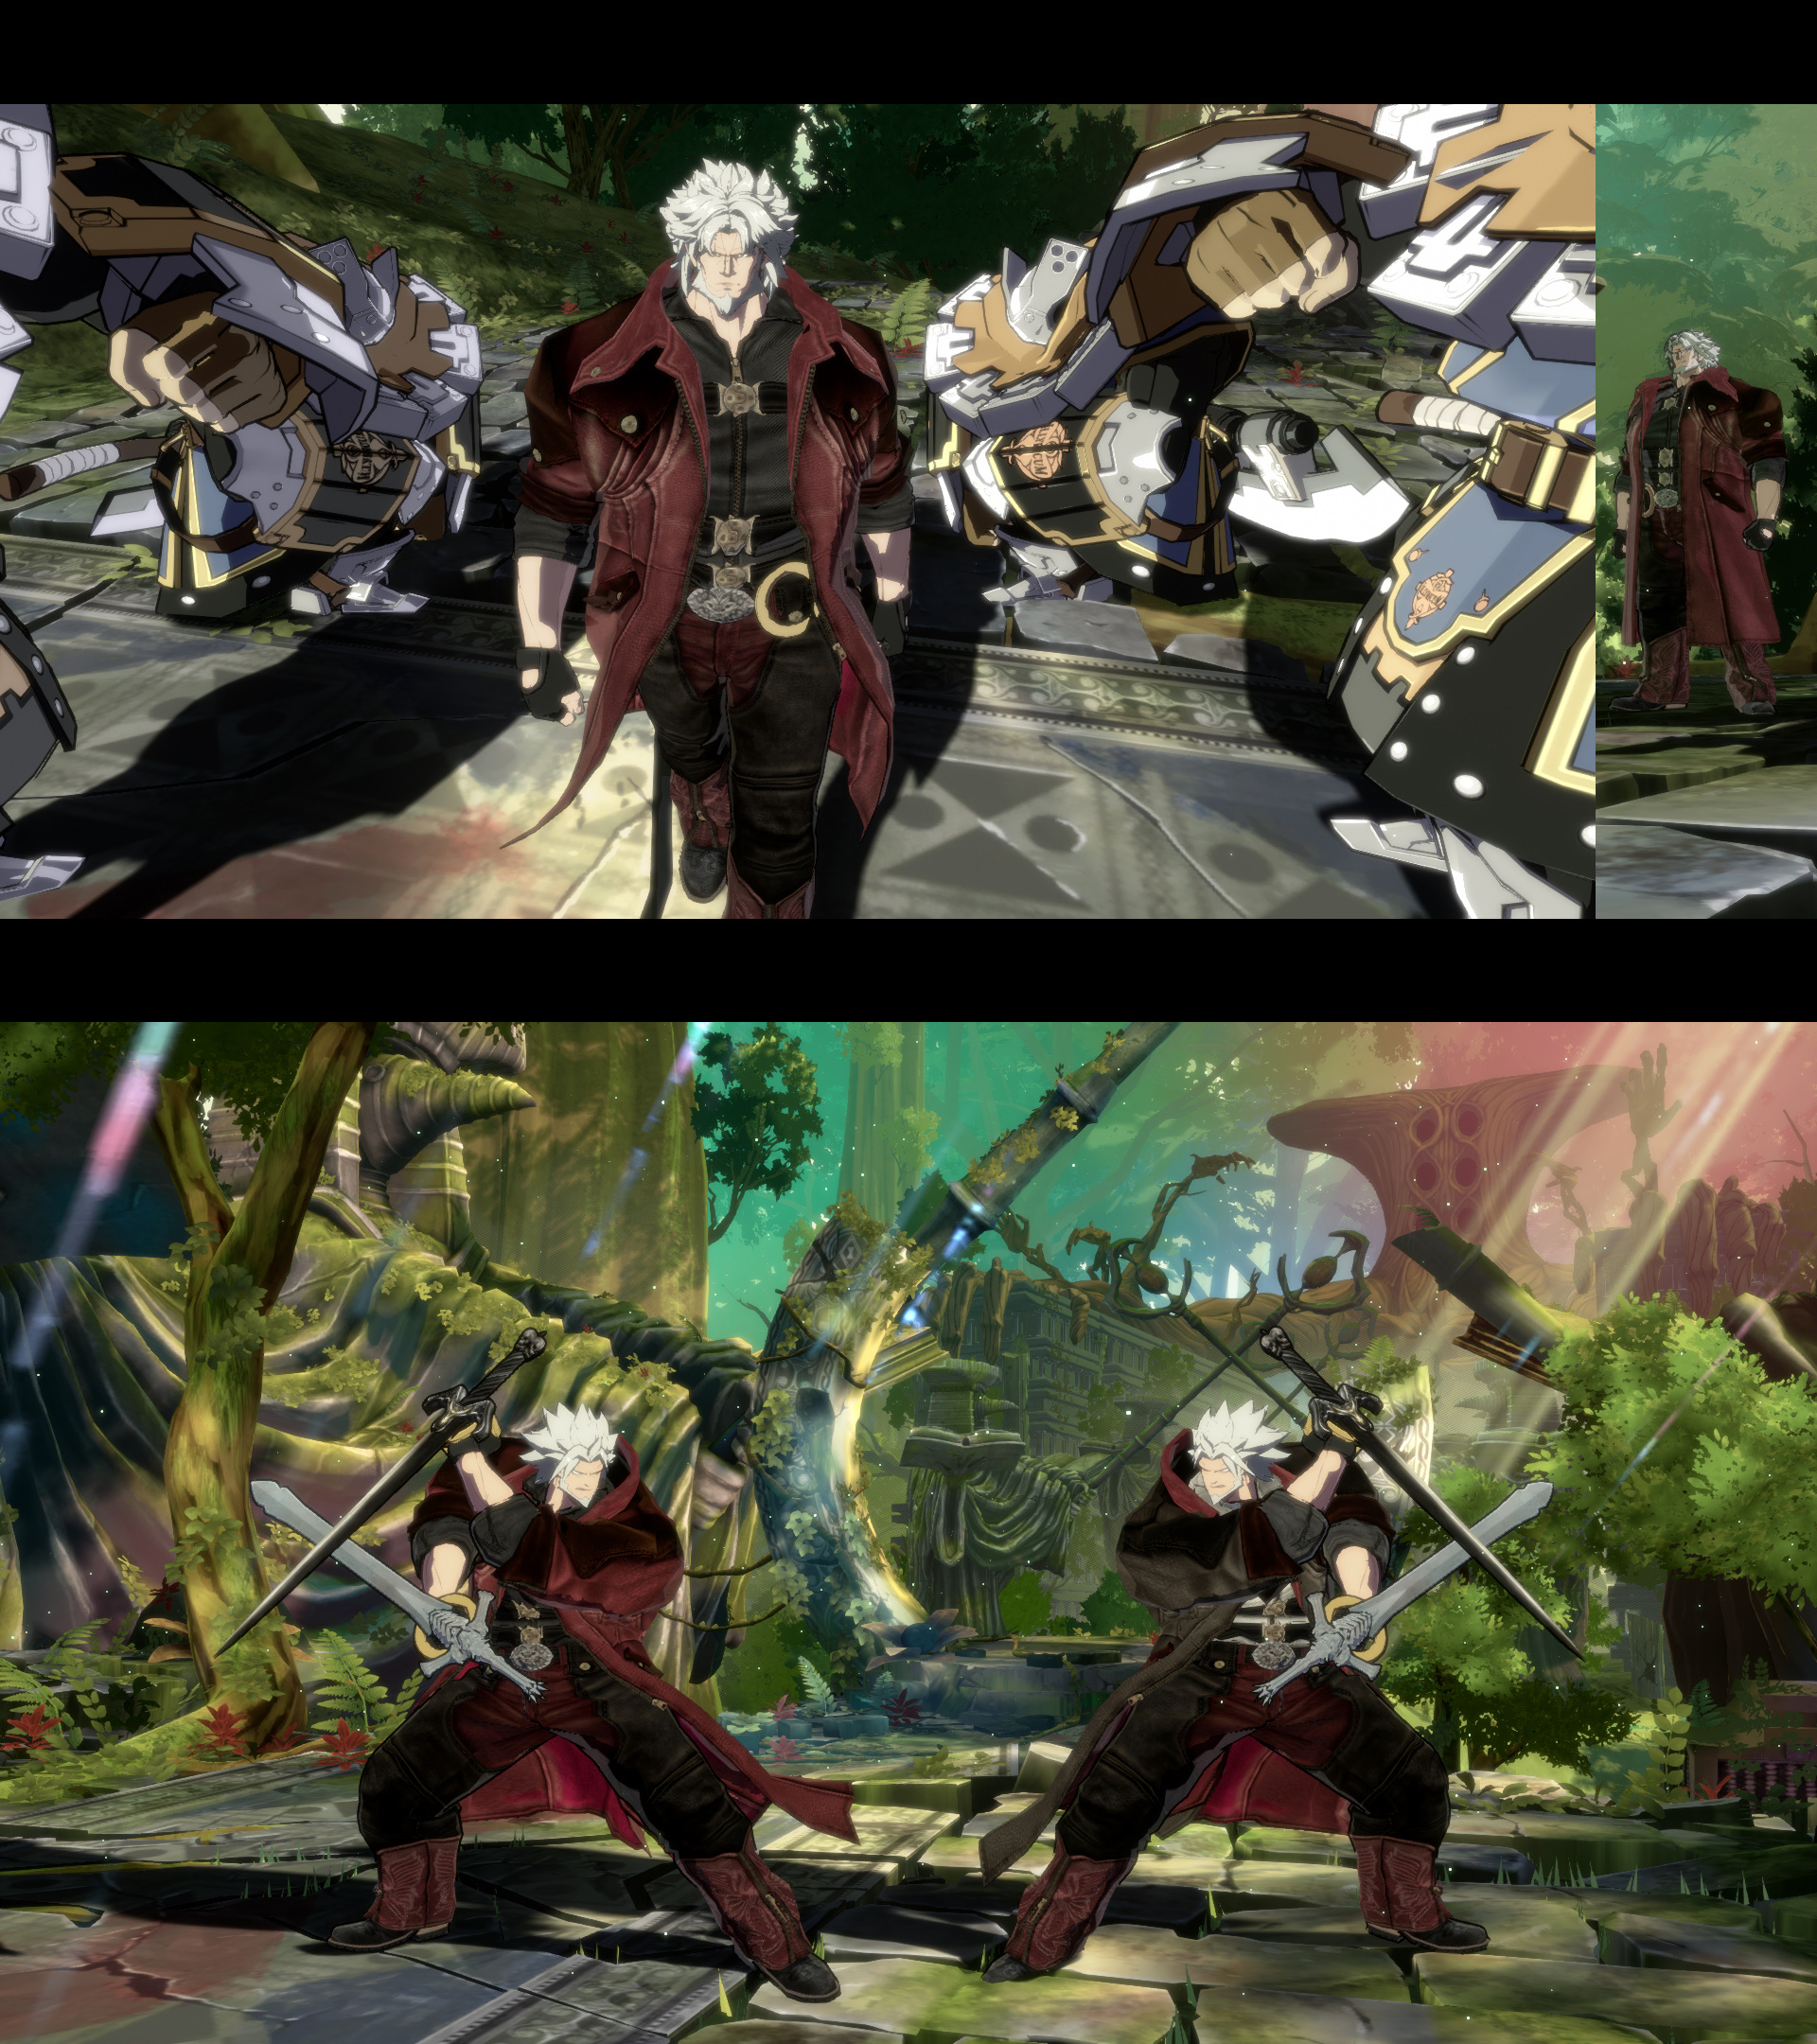 Steam Workshop::Nero in Devil May Cry 4